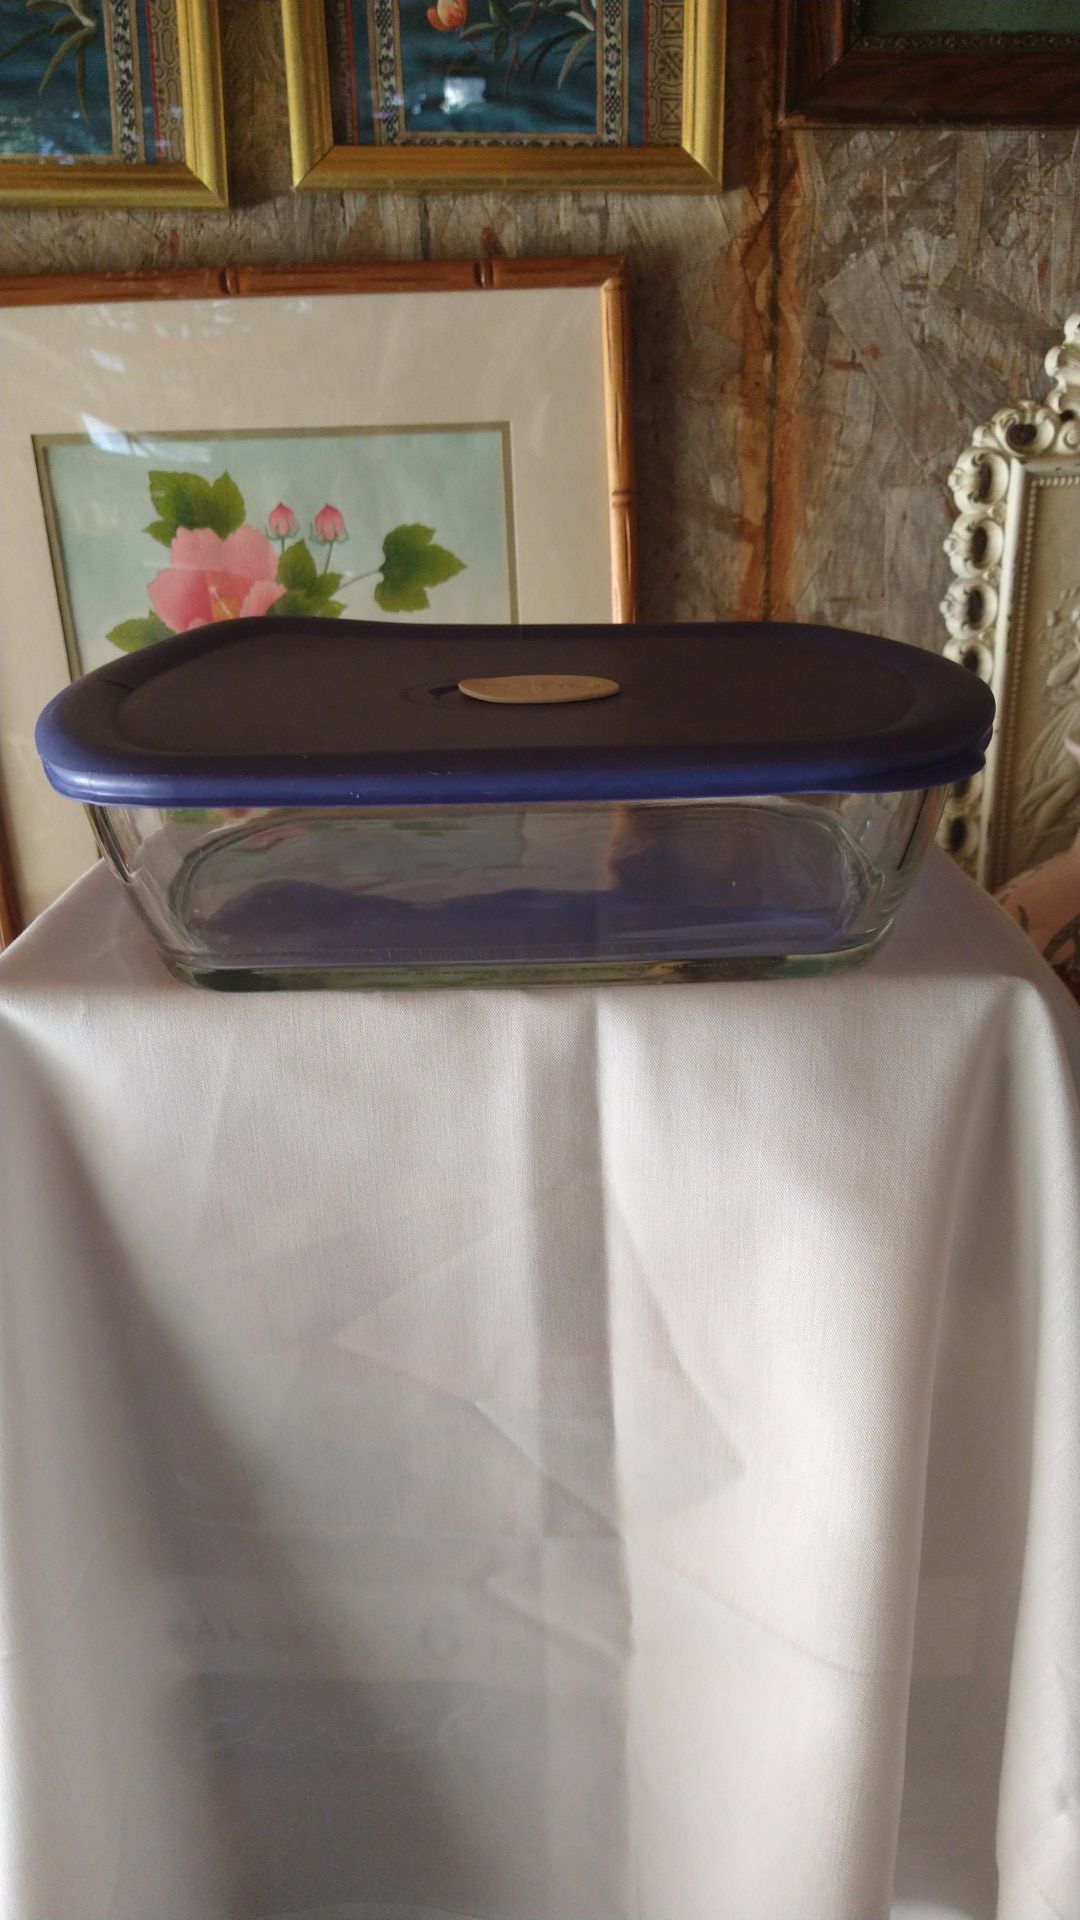 Pyrex baking dish with lid